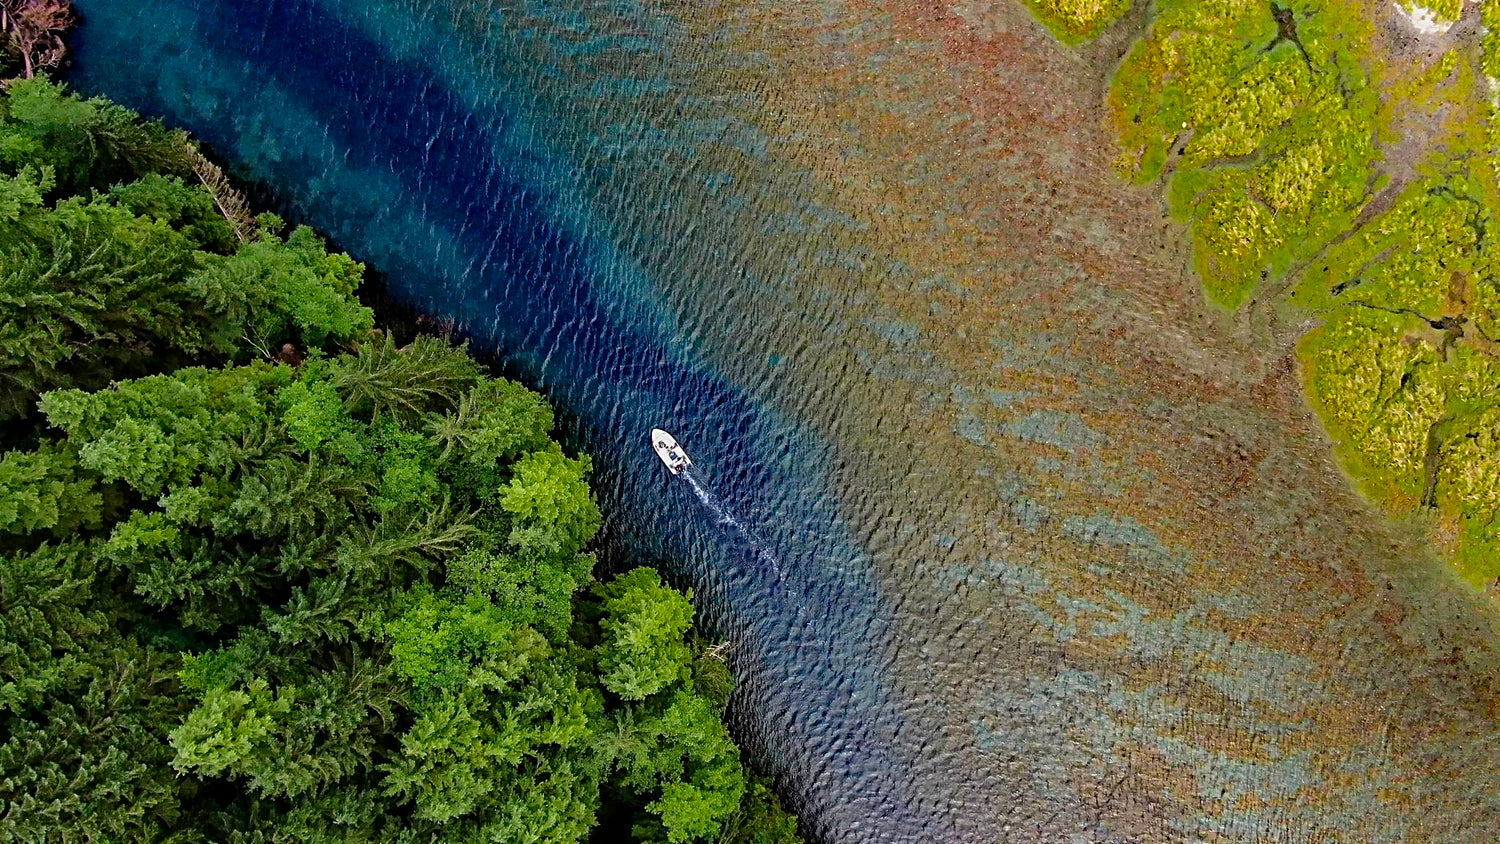 Drone image looking down on a small aluminum fishing boat moving through a shallow channel